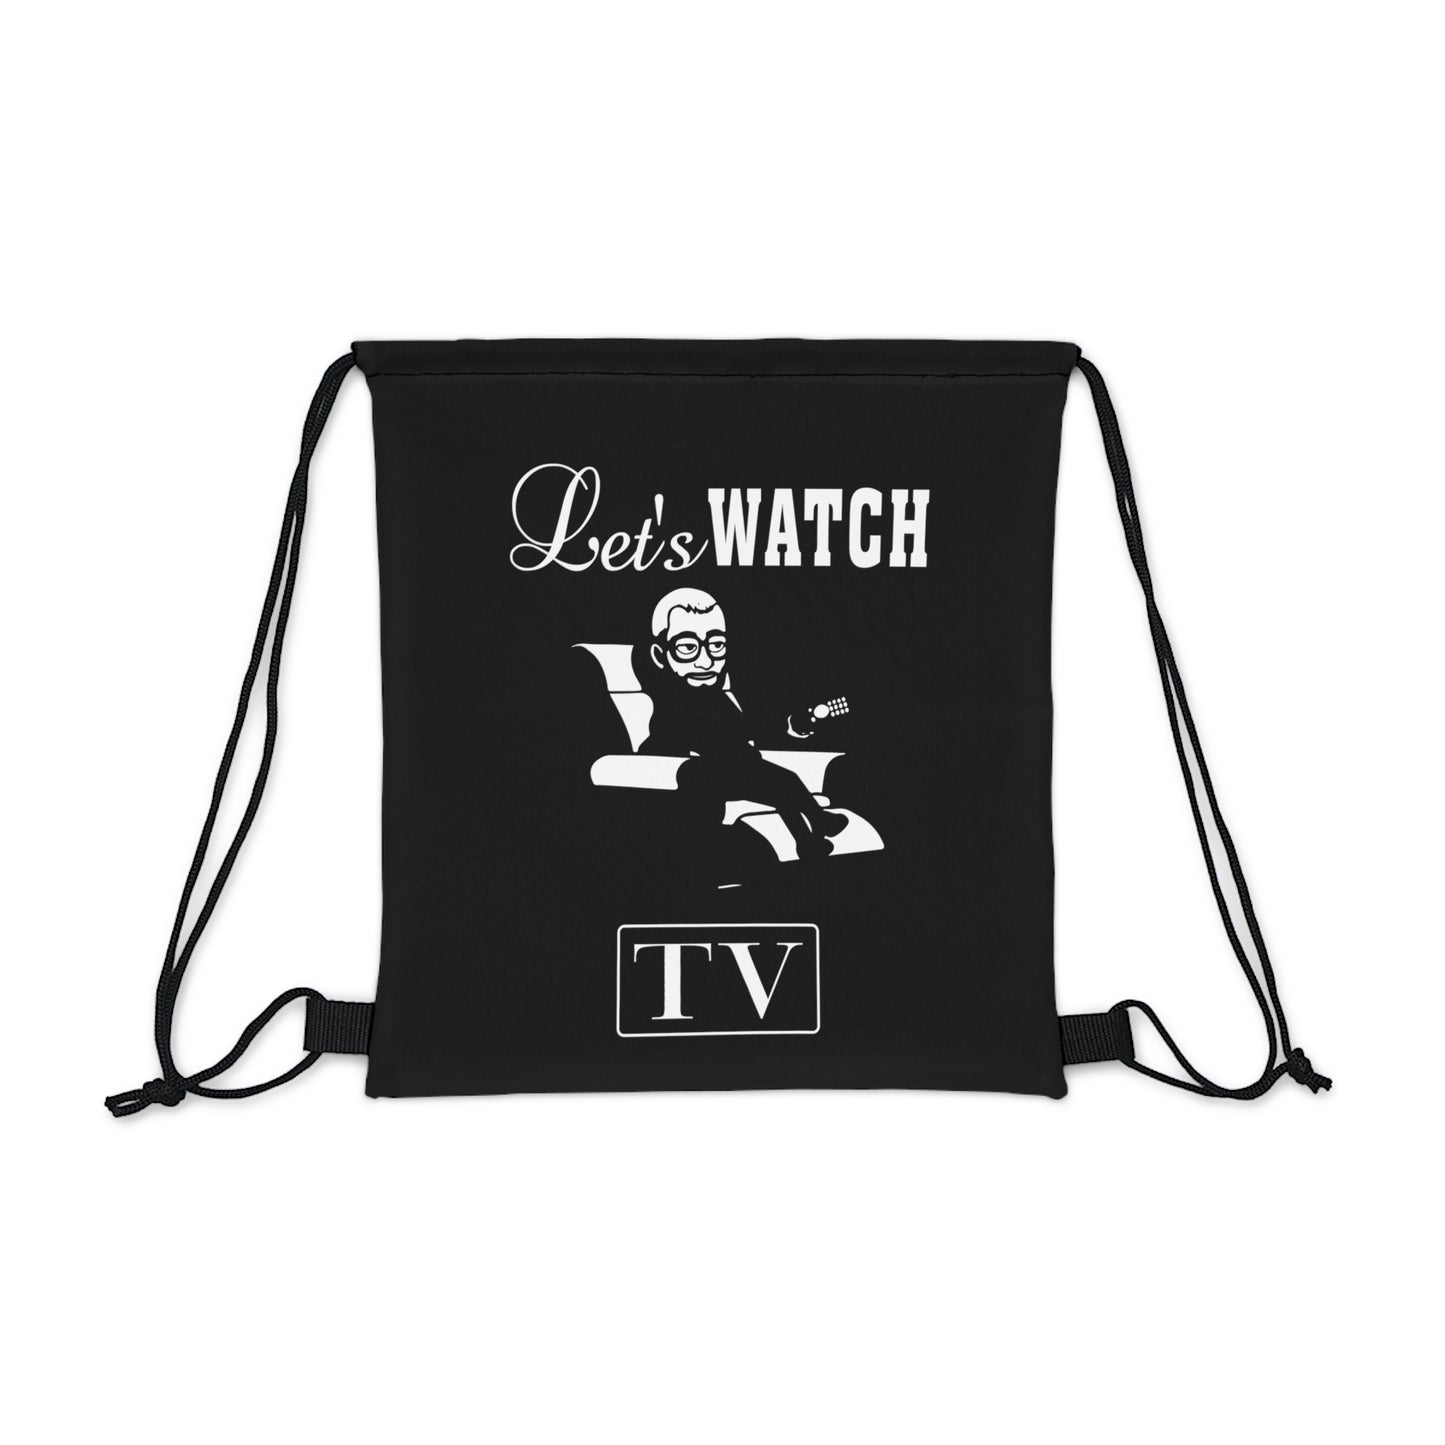 Jay Watch Let's Watch TV - Outdoor Drawstring Bag